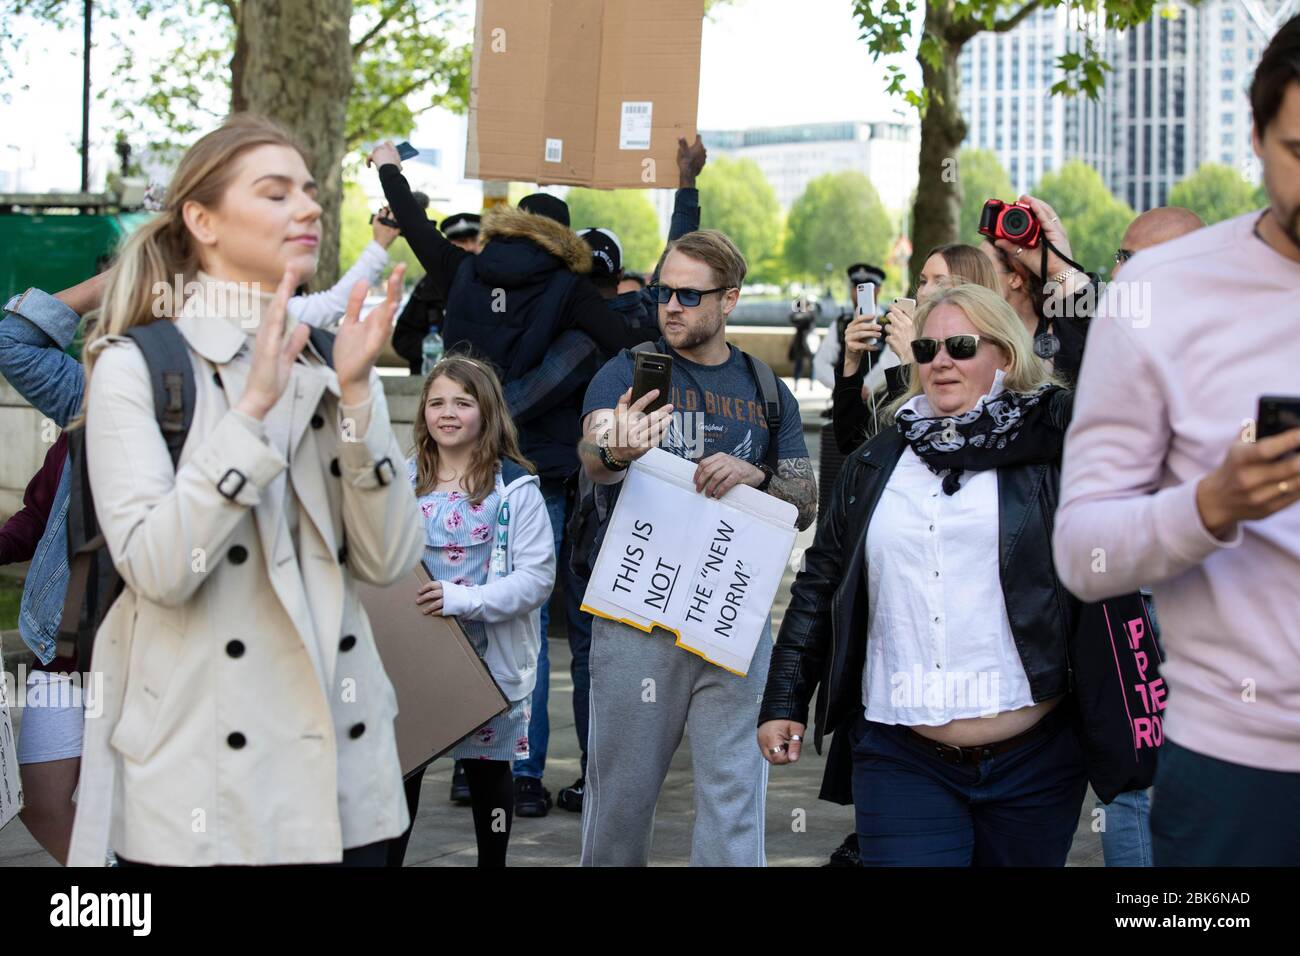 UK Coronavirus Lockdown protest, Central London, 02nd May 2020 Anti-Lockdown protesters gather outside New Scotland Yard, central London to show their disapproval against the current United Kingdom coronavirus COVID-19 restrictions. 02nd May, London, England, UK Credit: Clickpics/Alamy Live News Stock Photo